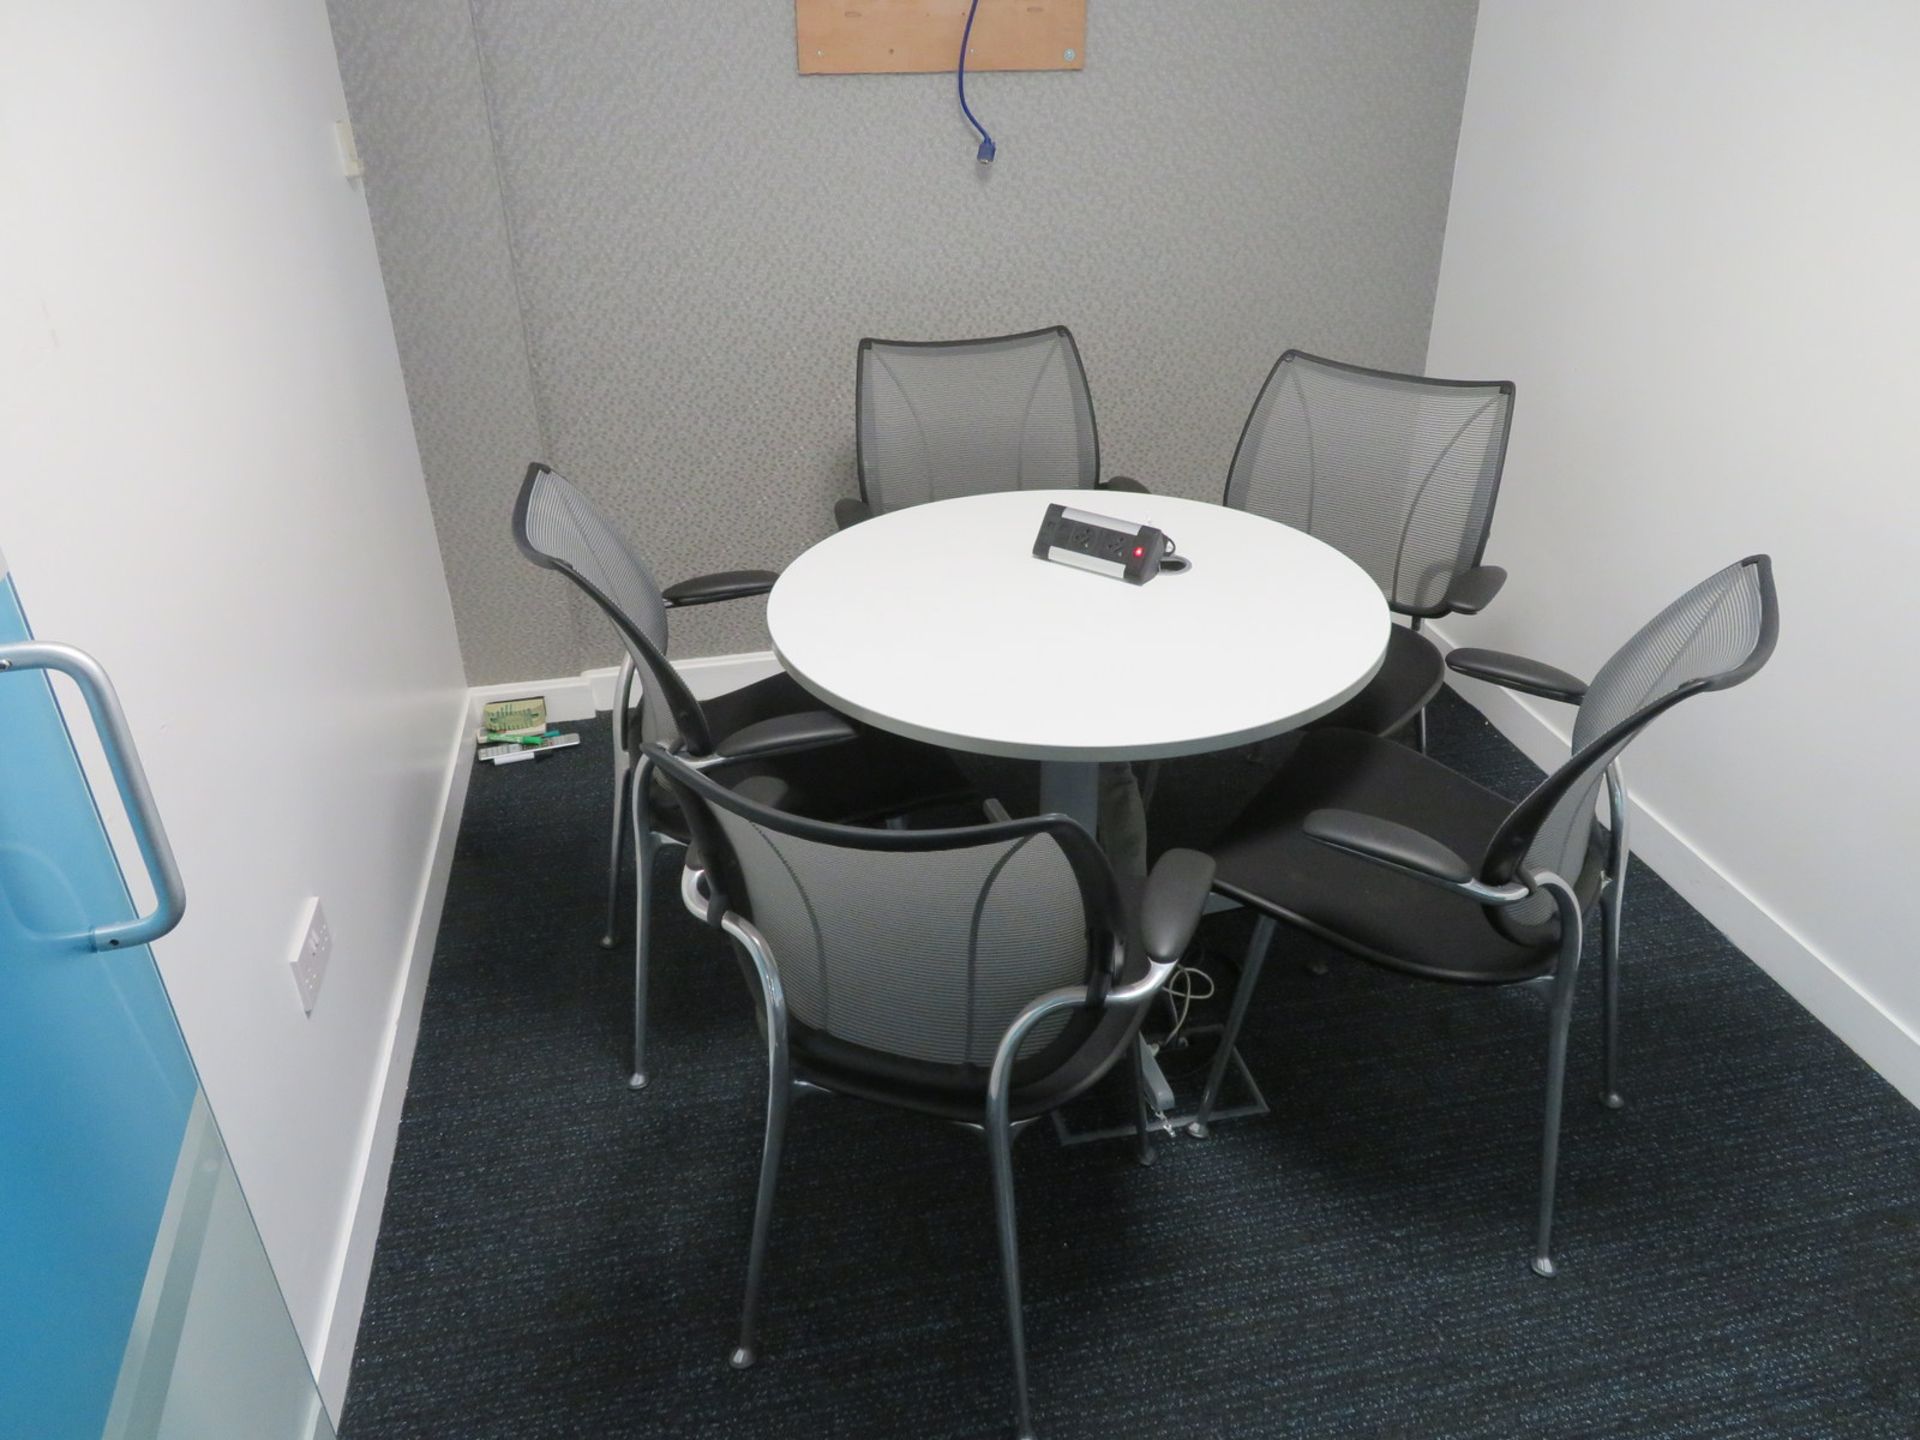 Meeting Room To Include Round Table And 5 Office Chairs.